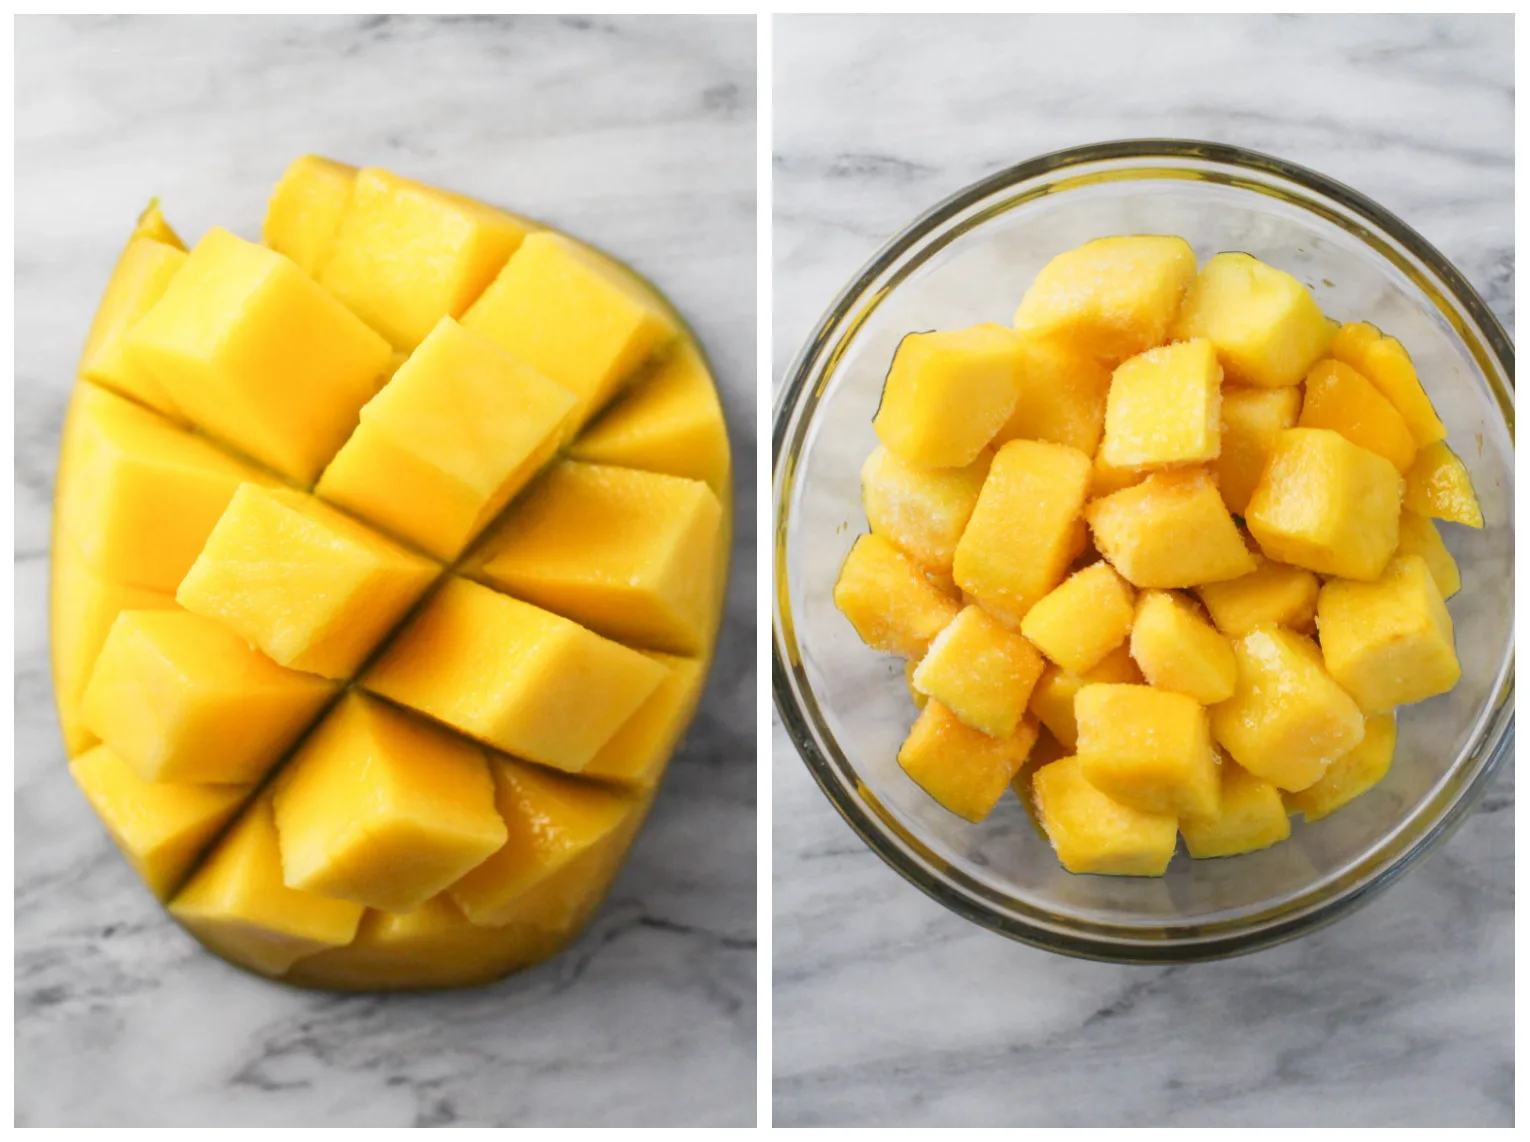 Two side-by-side images. Image on the left: sliced fresh mango on skin. Image on the right: mango chunks in a bowl.